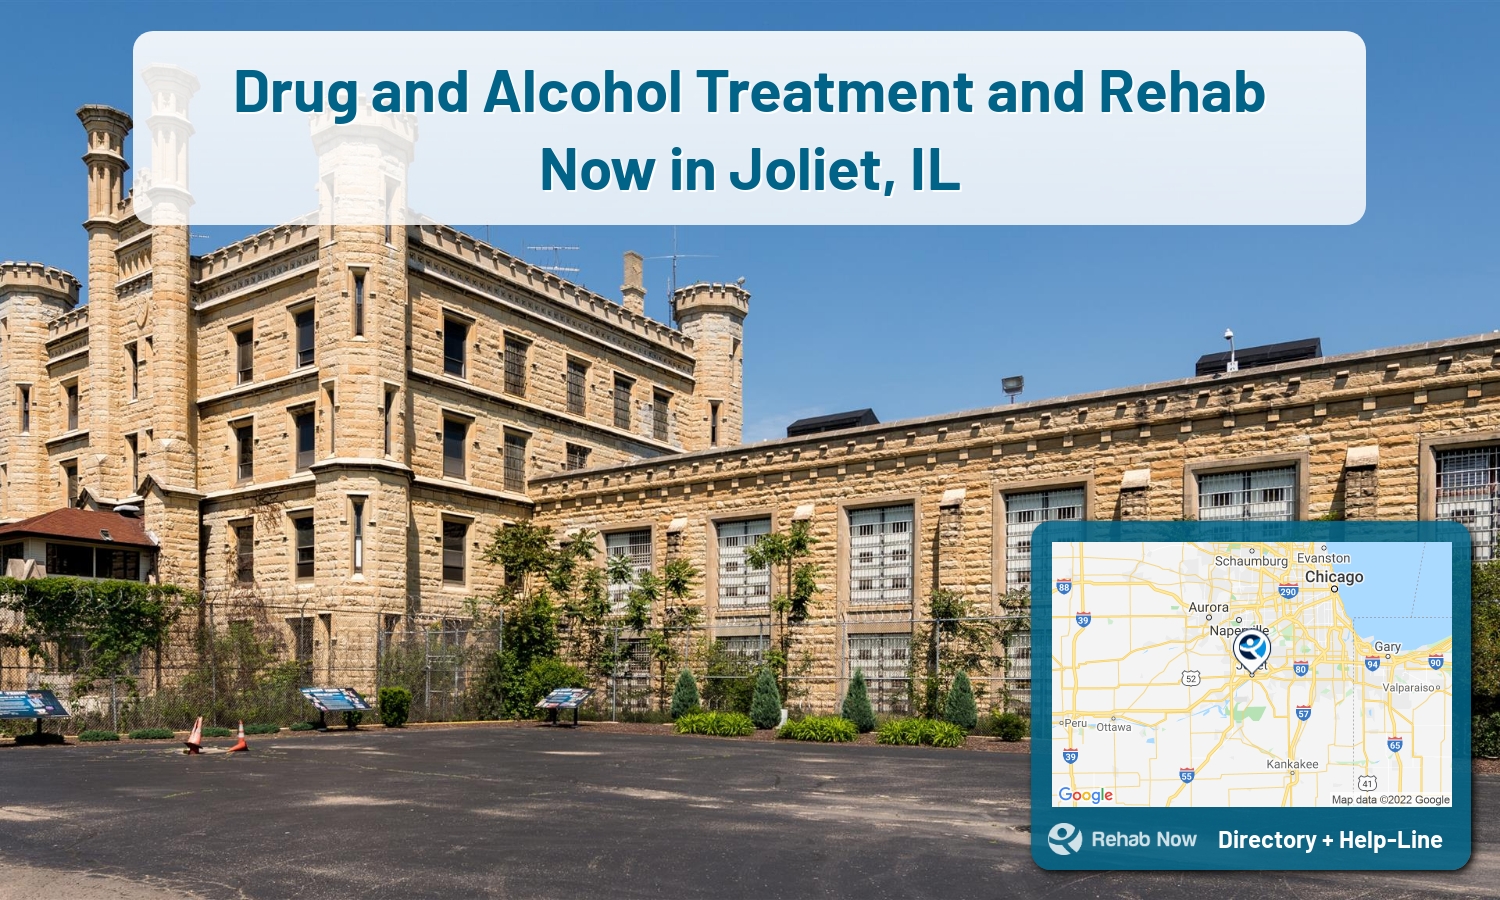 Joliet, IL Treatment Centers. Find drug rehab in Joliet, Illinois, or detox and treatment programs. Get the right help now!